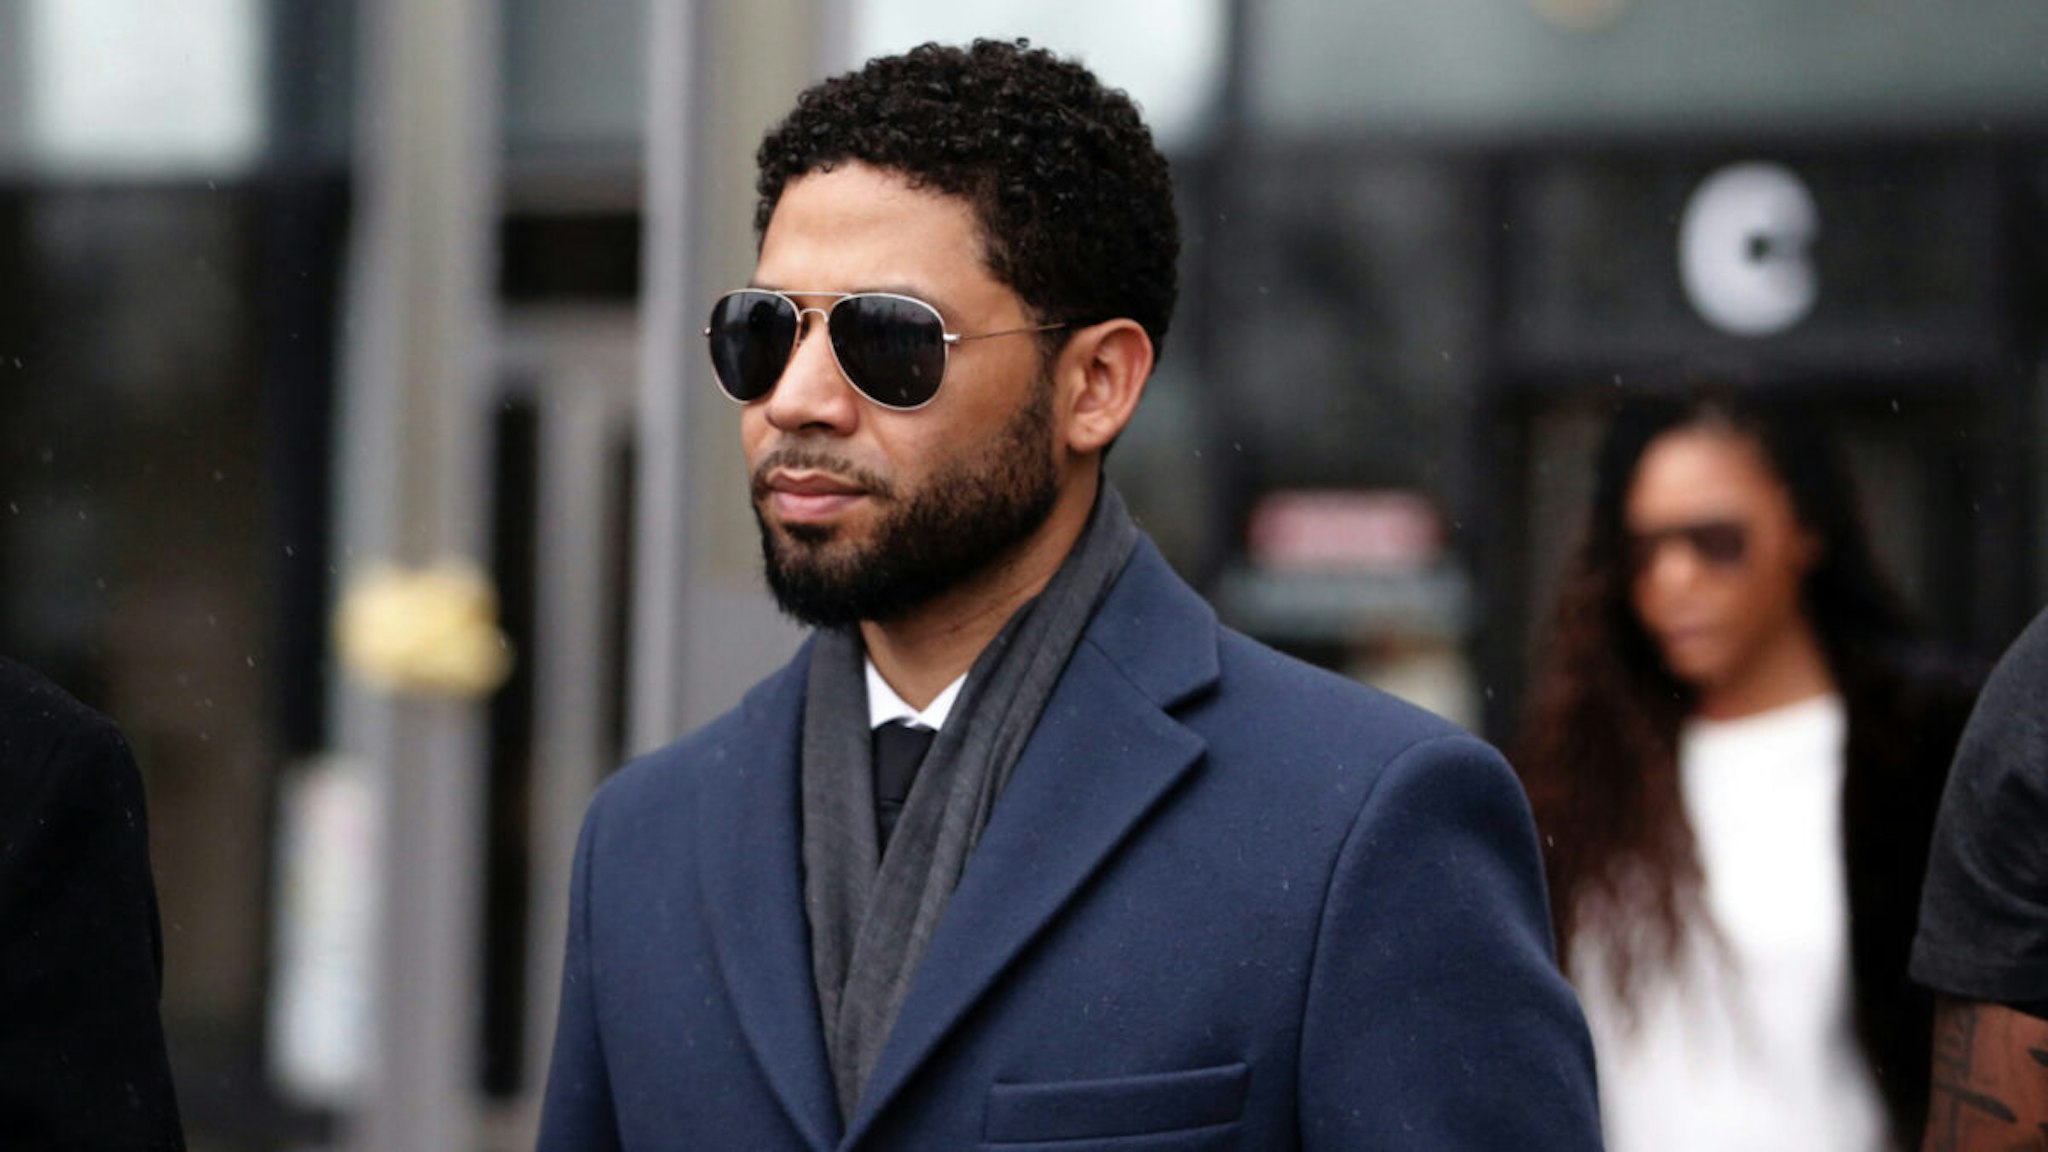 Actor Jussie Smollett leaves Leighton Criminal Courthouse after his court appearance on March 14, 2019 in Chicago, Illinois.